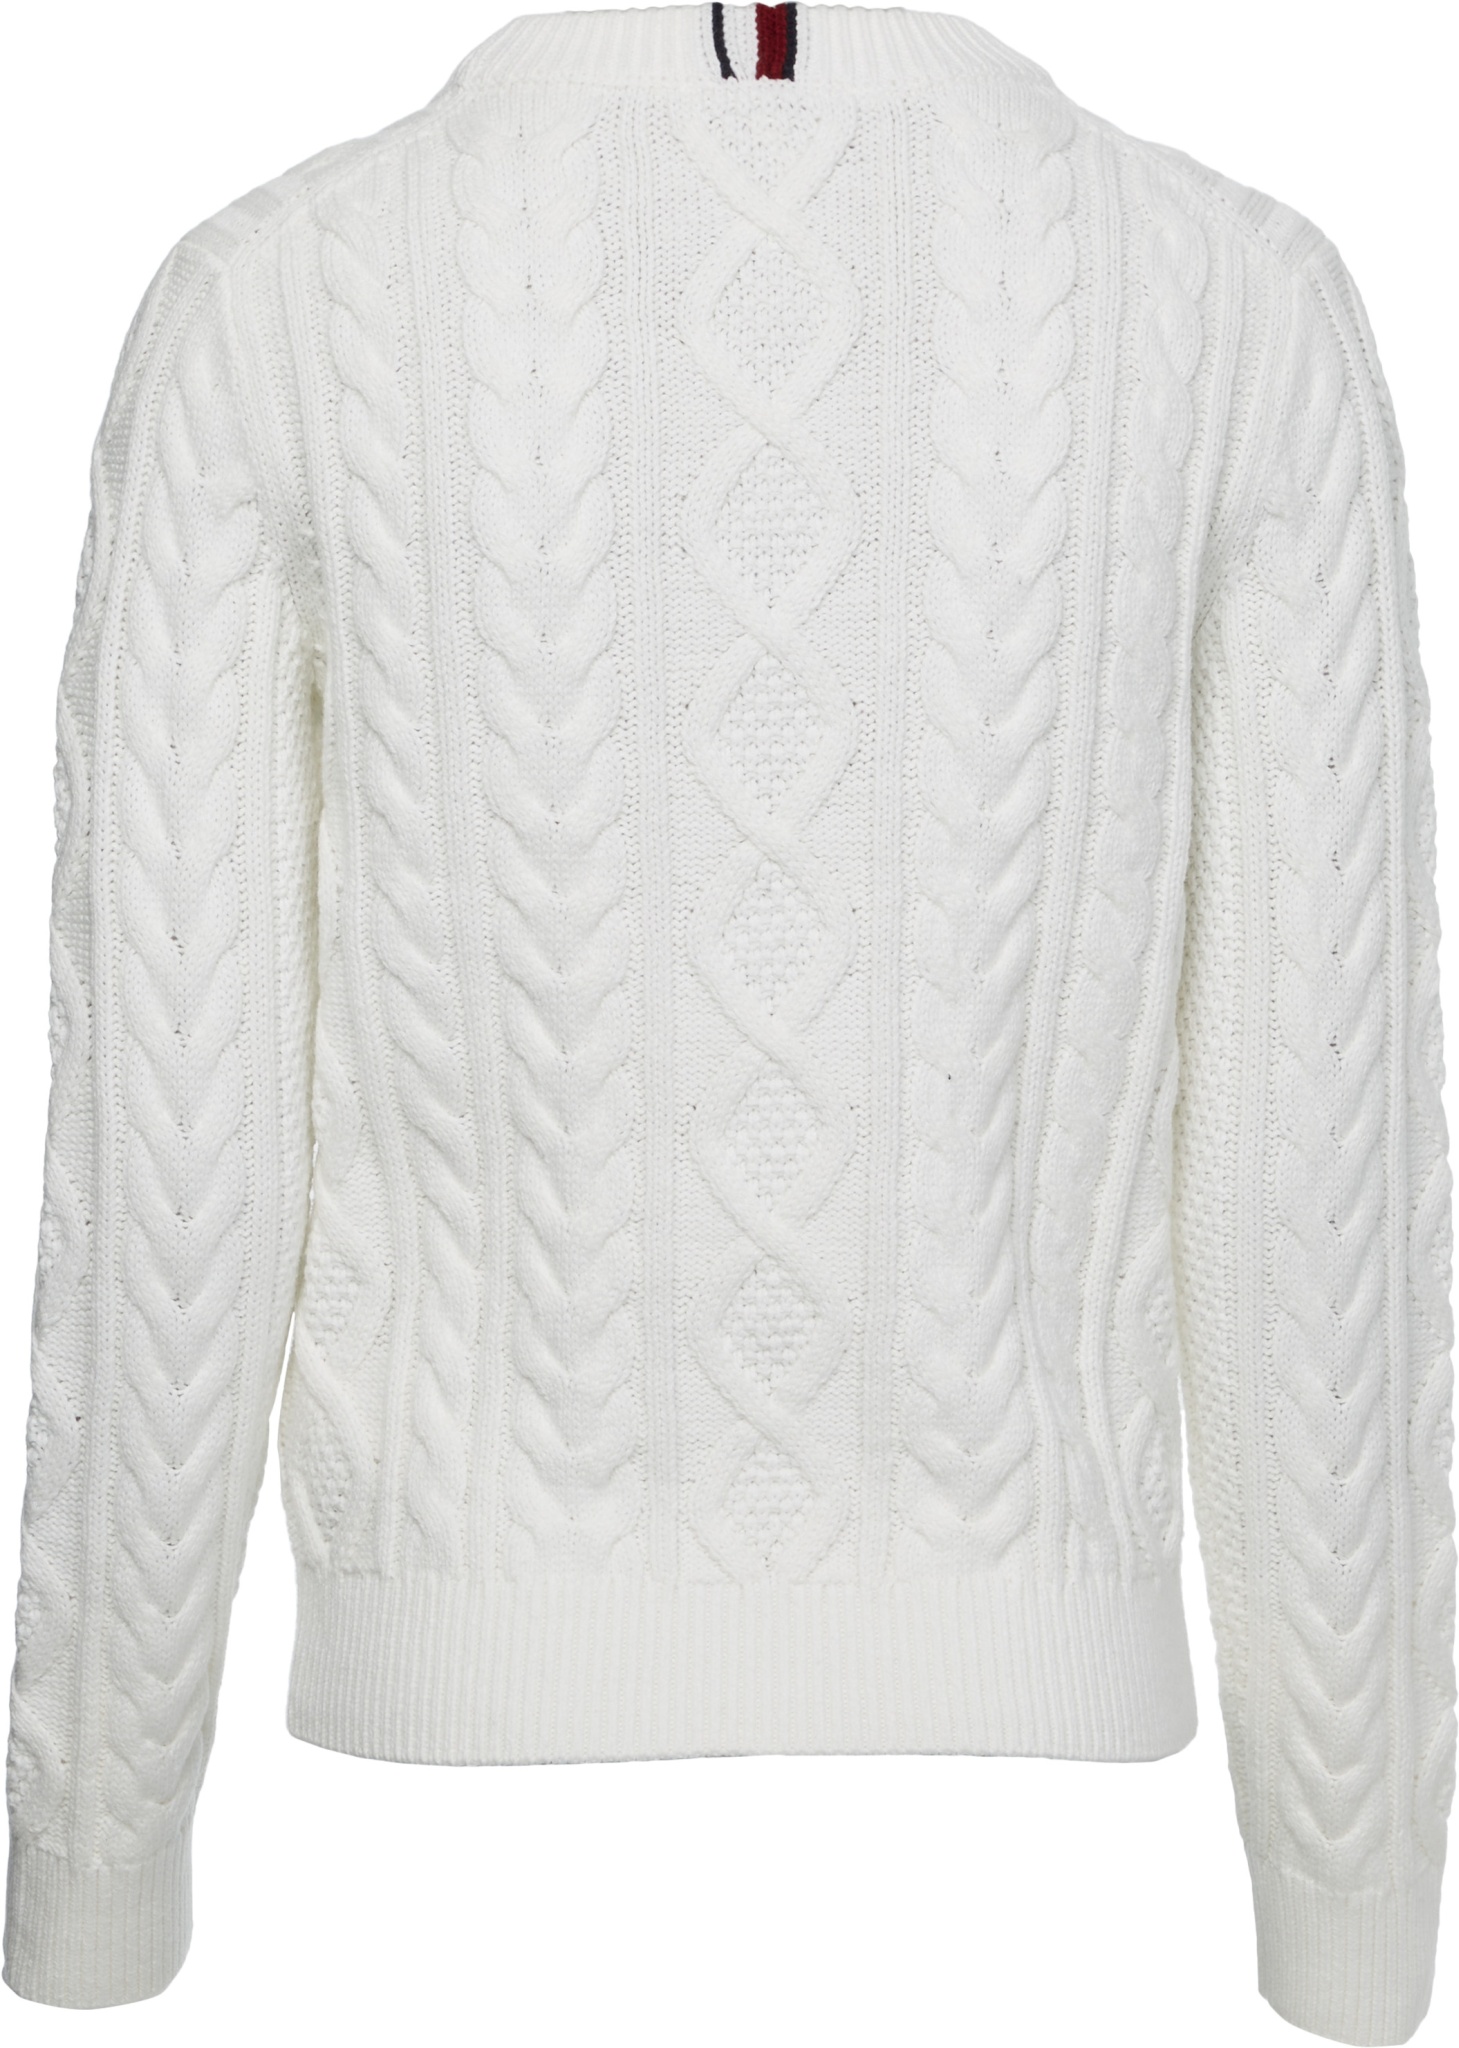 TOMMY HILFIGER CURVE Pullover 10675314